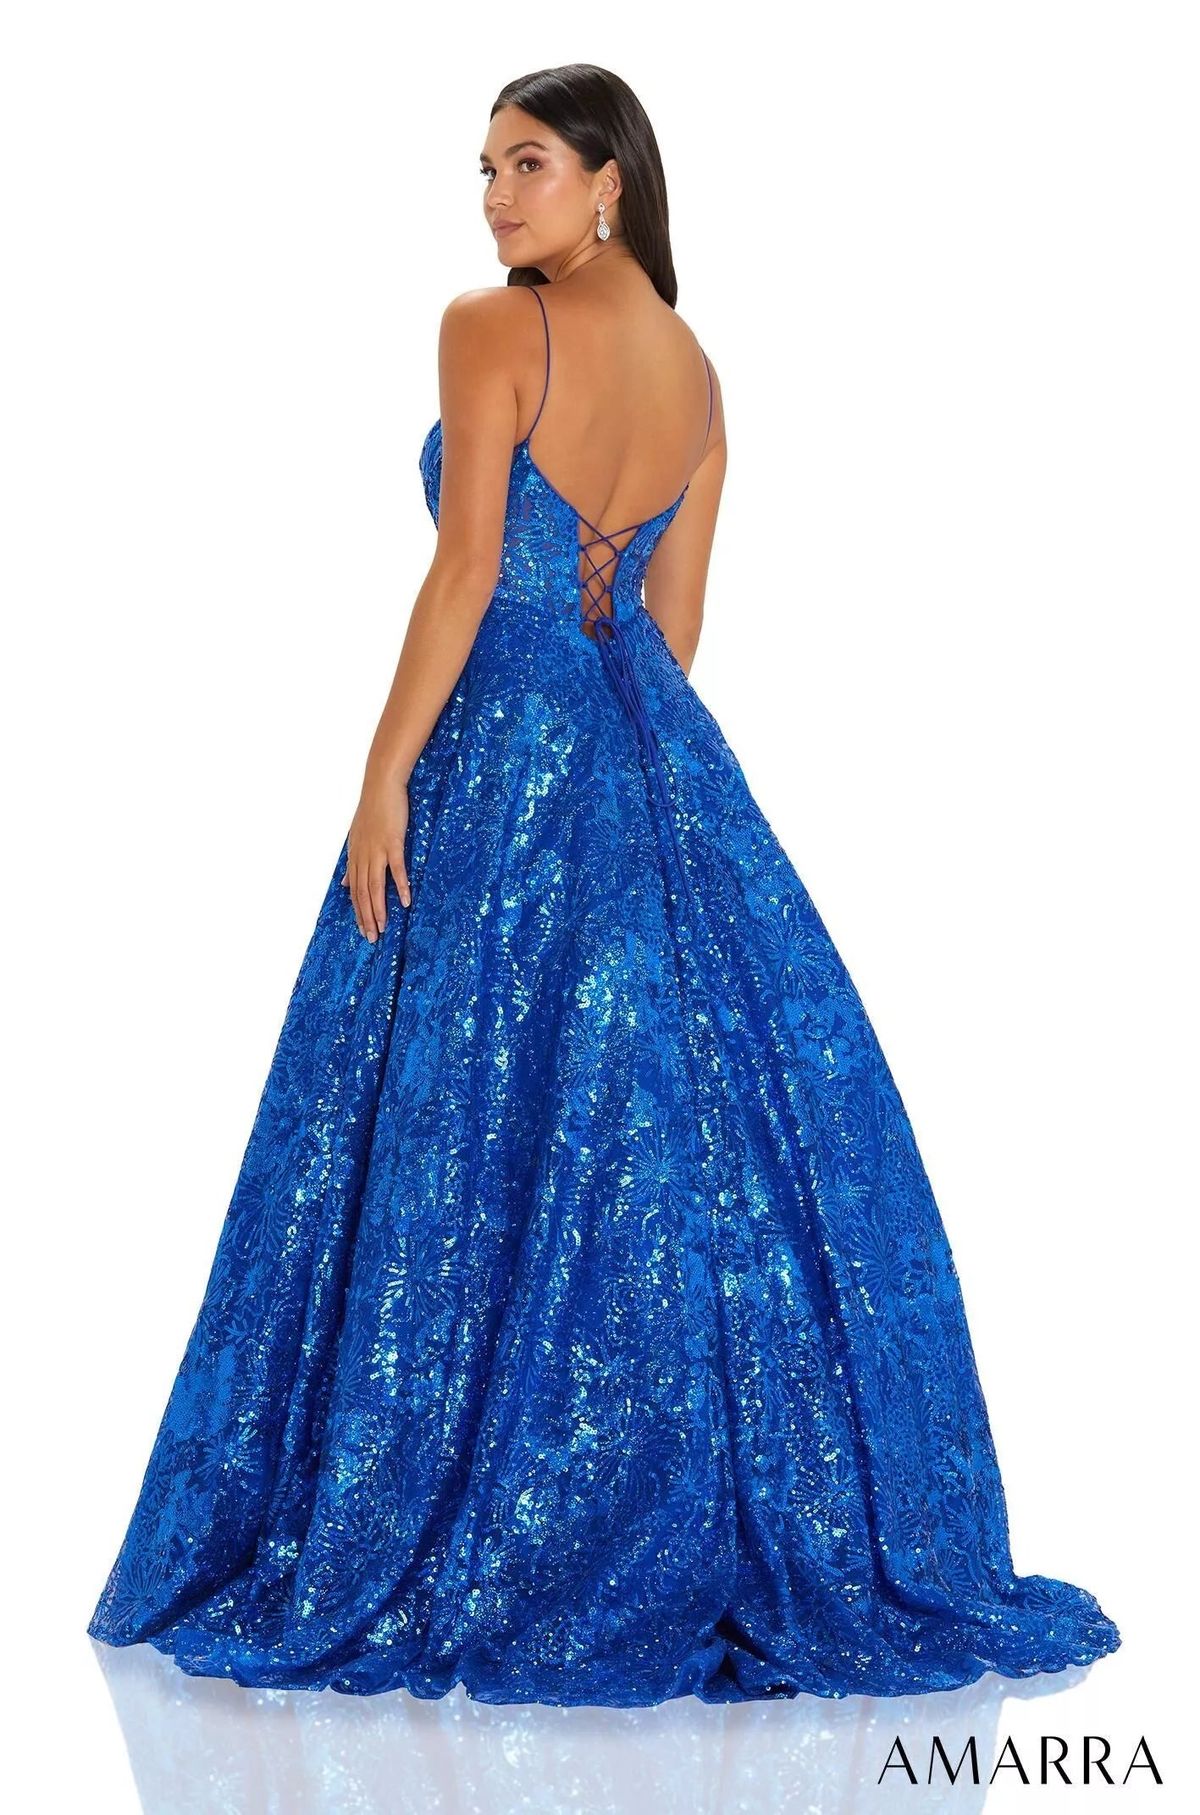 Style ATLAS_ROYALBLUE6_B4A46 Amarra Size 6 Prom Sequined Blue Ball Gown on Queenly